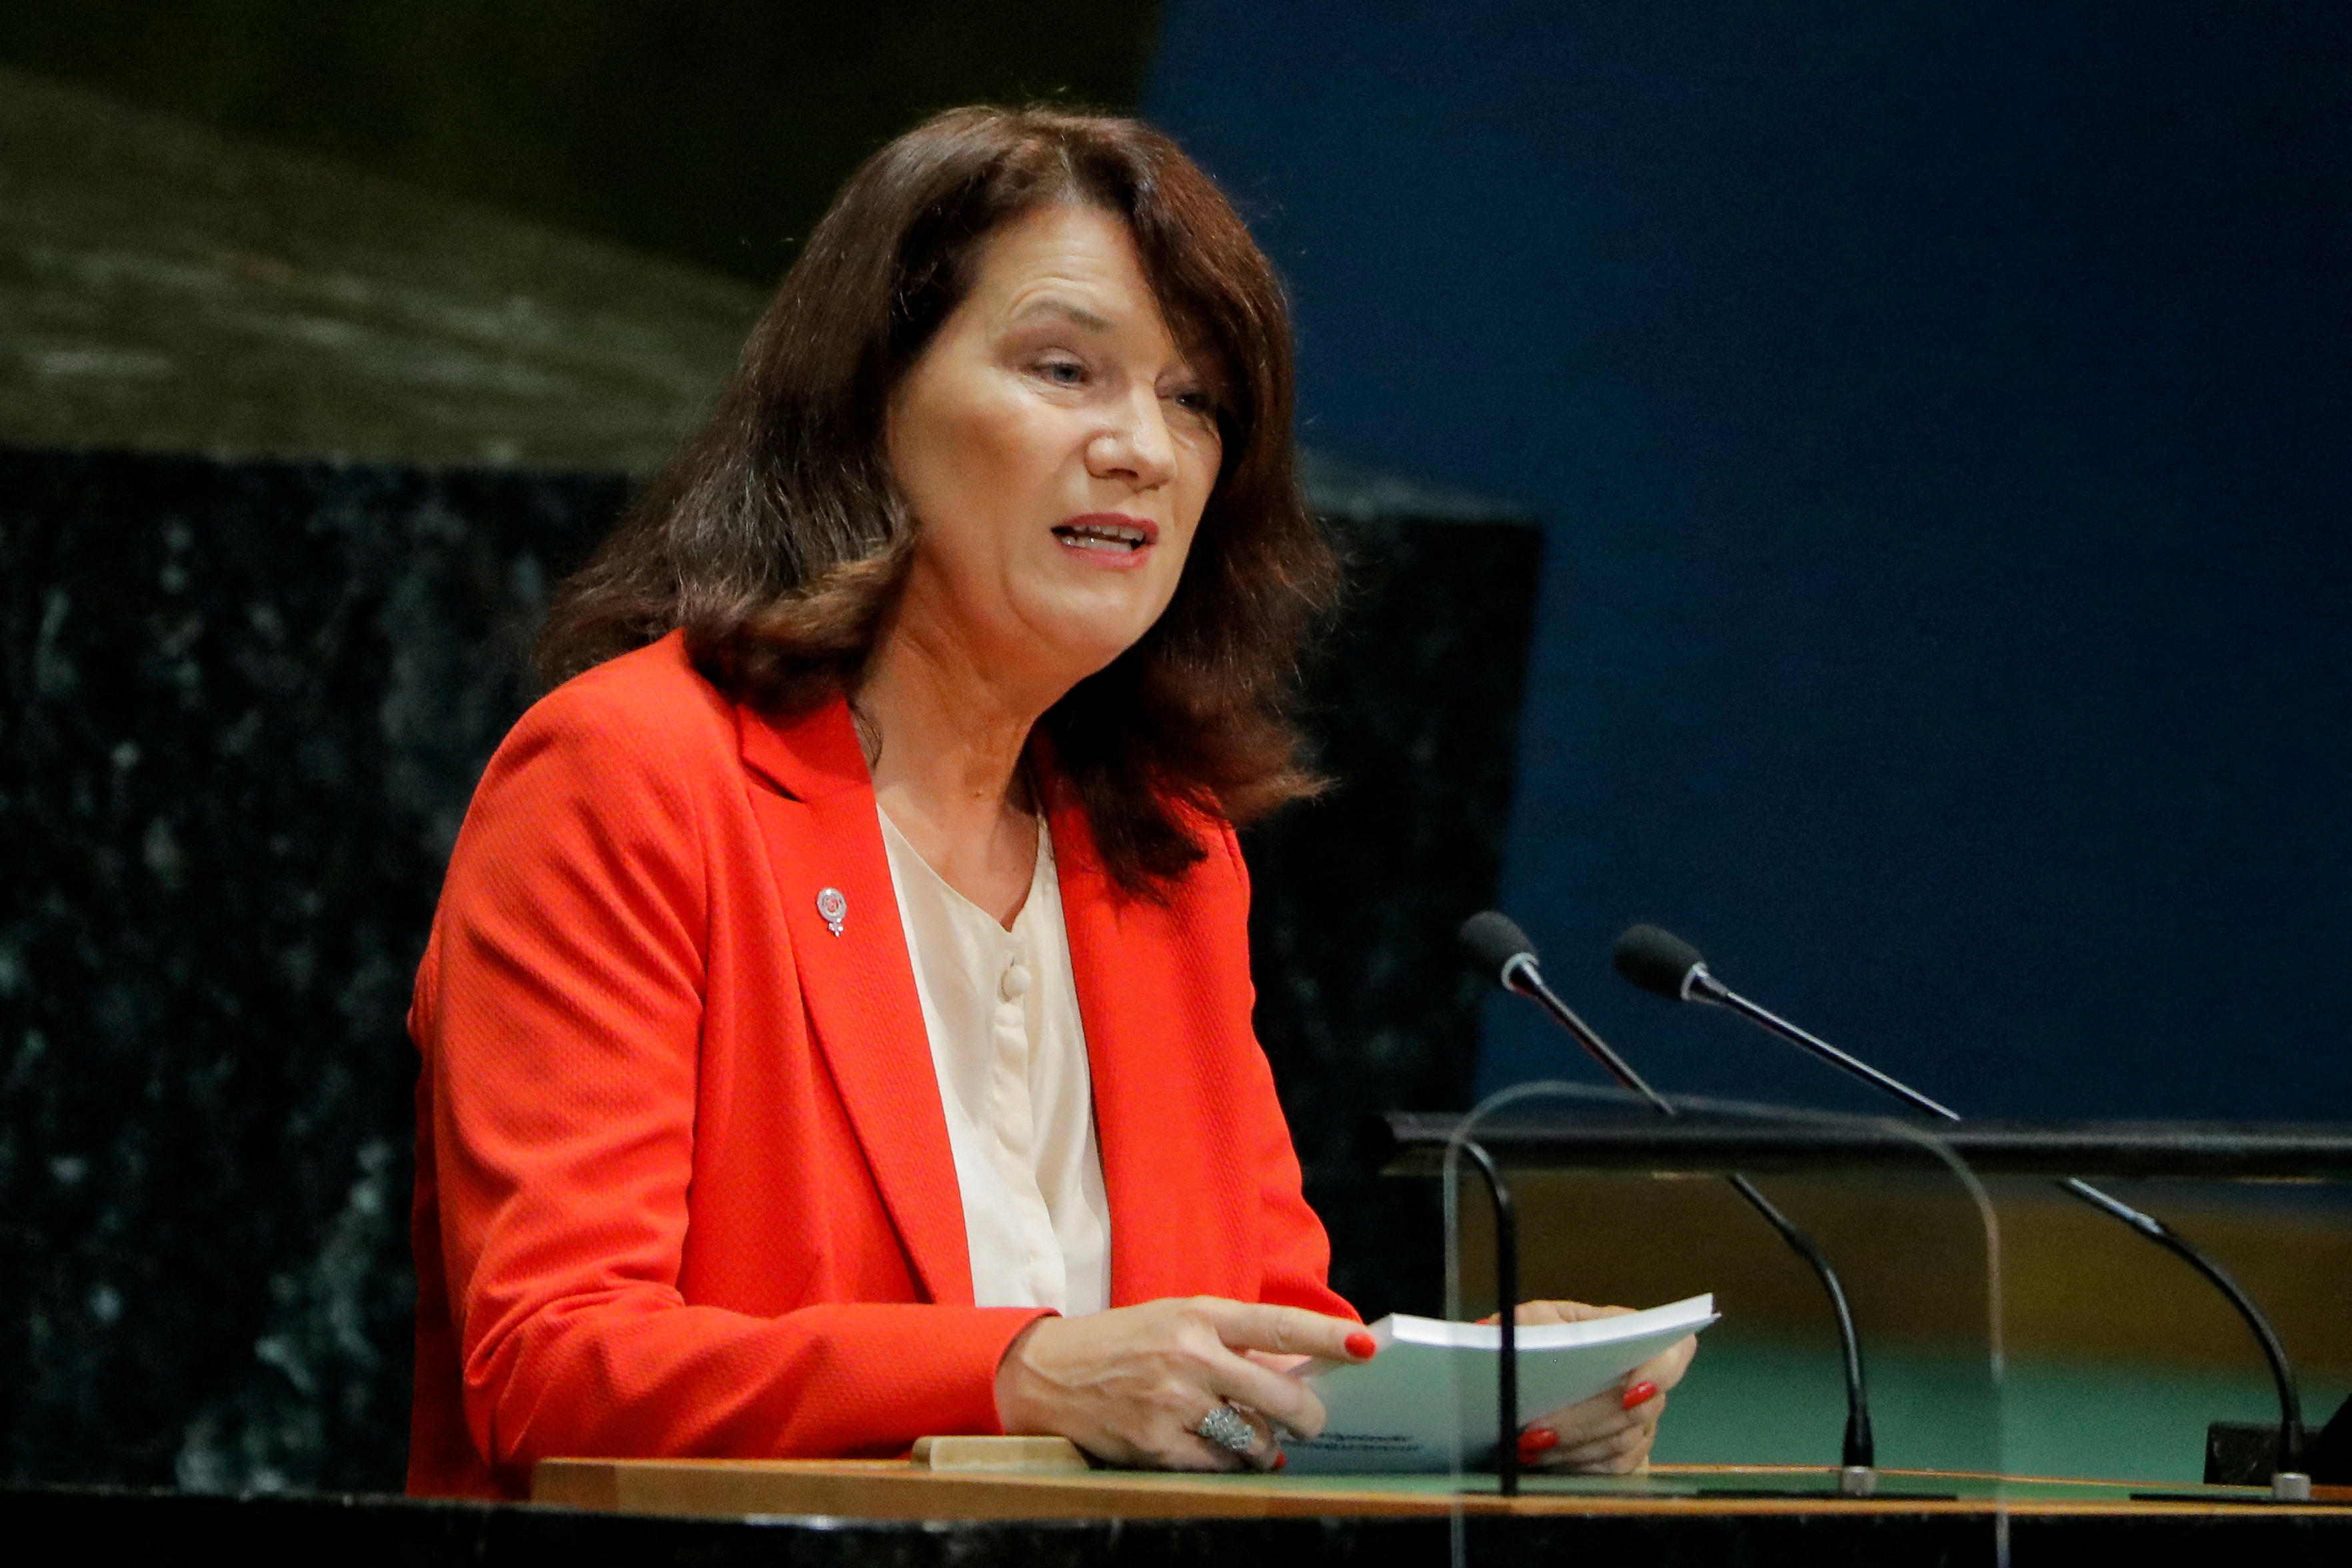   Foreign Minister of Sweden Ann Linde addresses the 74th session of the United Nations General Assembly at U.N. headquarters in New York City, New York, U.S., September 28, 2019.  REUTERS/Brendan McDermid/File Photo